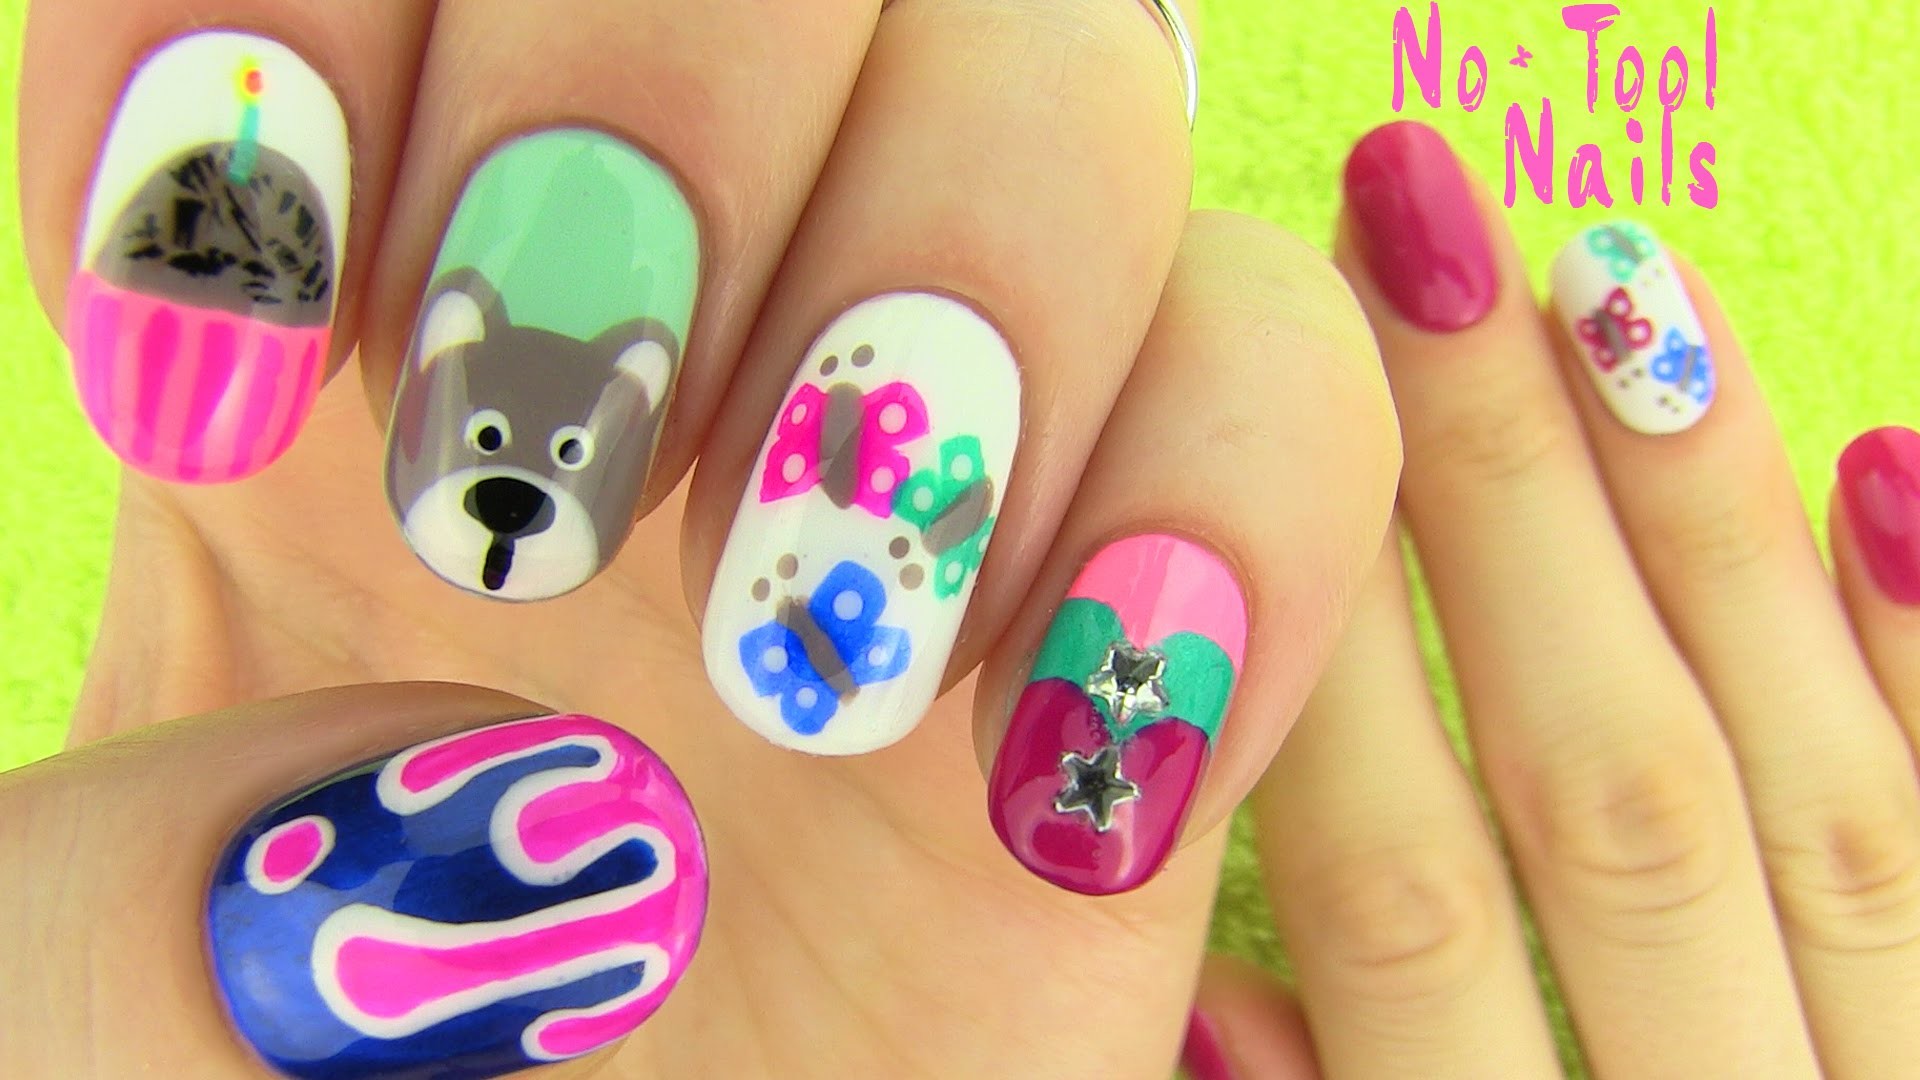 nail art hd picture ture